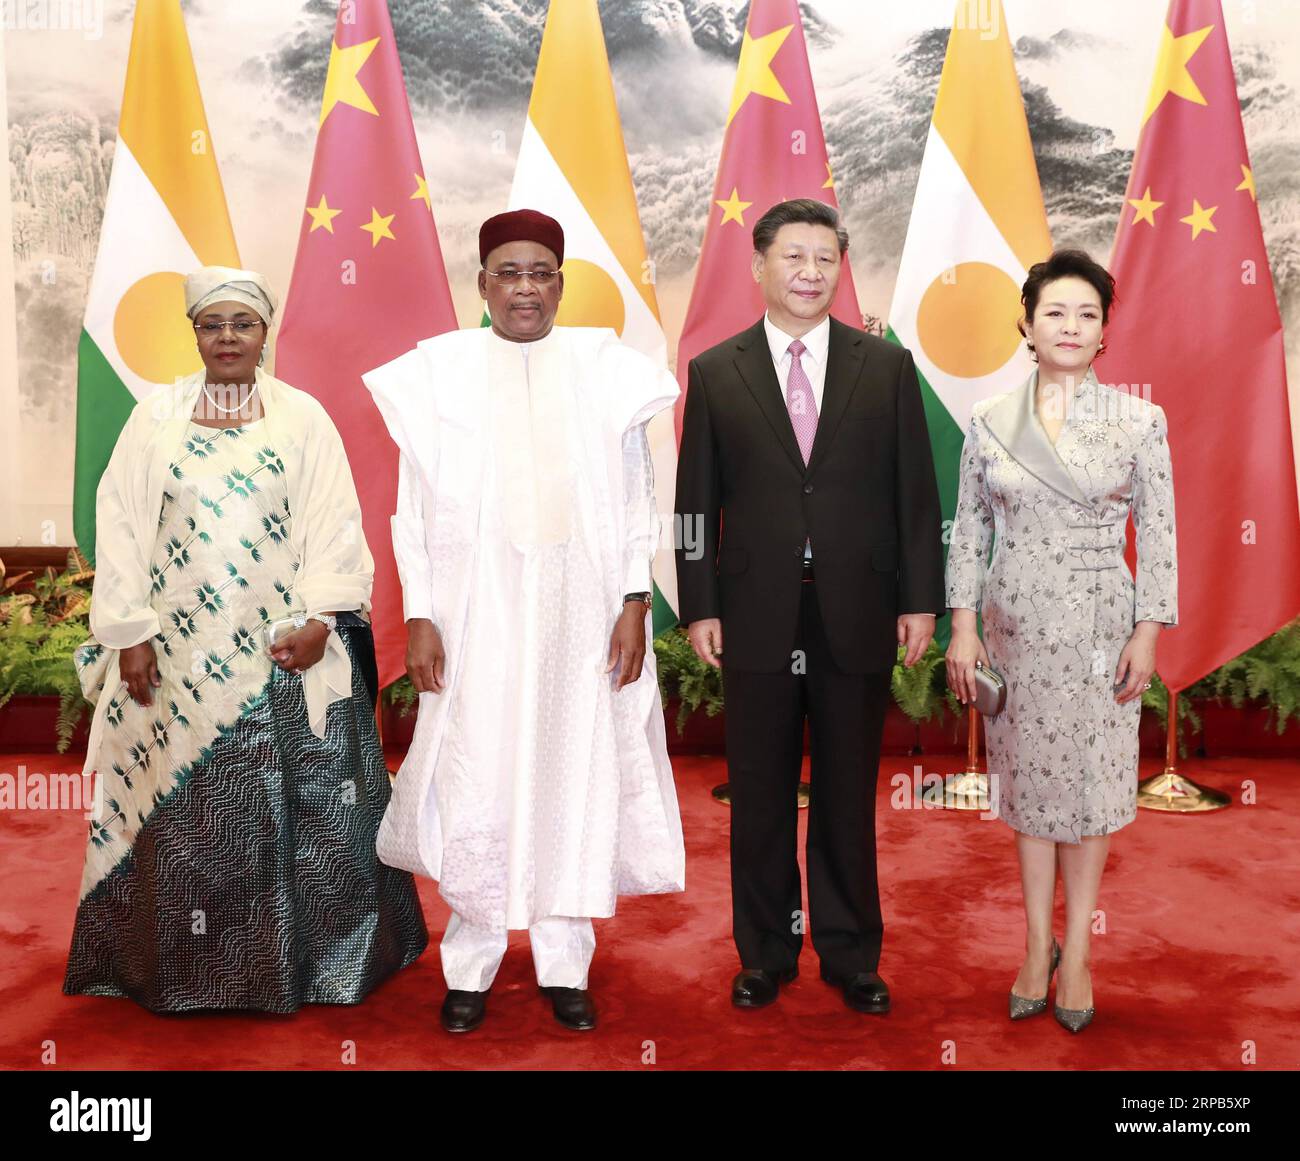 (190528) -- BEIJING, May 28, 2019 (Xinhua) -- Chinese President Xi Jinping (2nd R) and his wife Peng Liyuan (1st R) pose for photos with Nigerien President Mahamadou Issoufou (2nd L) and his wife in Beijing, capital of China, May 28, 2019. Xi held talks on Tuesday with Mahamadou Issoufou at the Great Hall of the People in Beijing. (Xinhua/Pang Xinglei) CHINA-BEIJING-XI JINPING-NIGERIEN PRESIDENT-TALKS (CN) PUBLICATIONxNOTxINxCHN Stock Photo